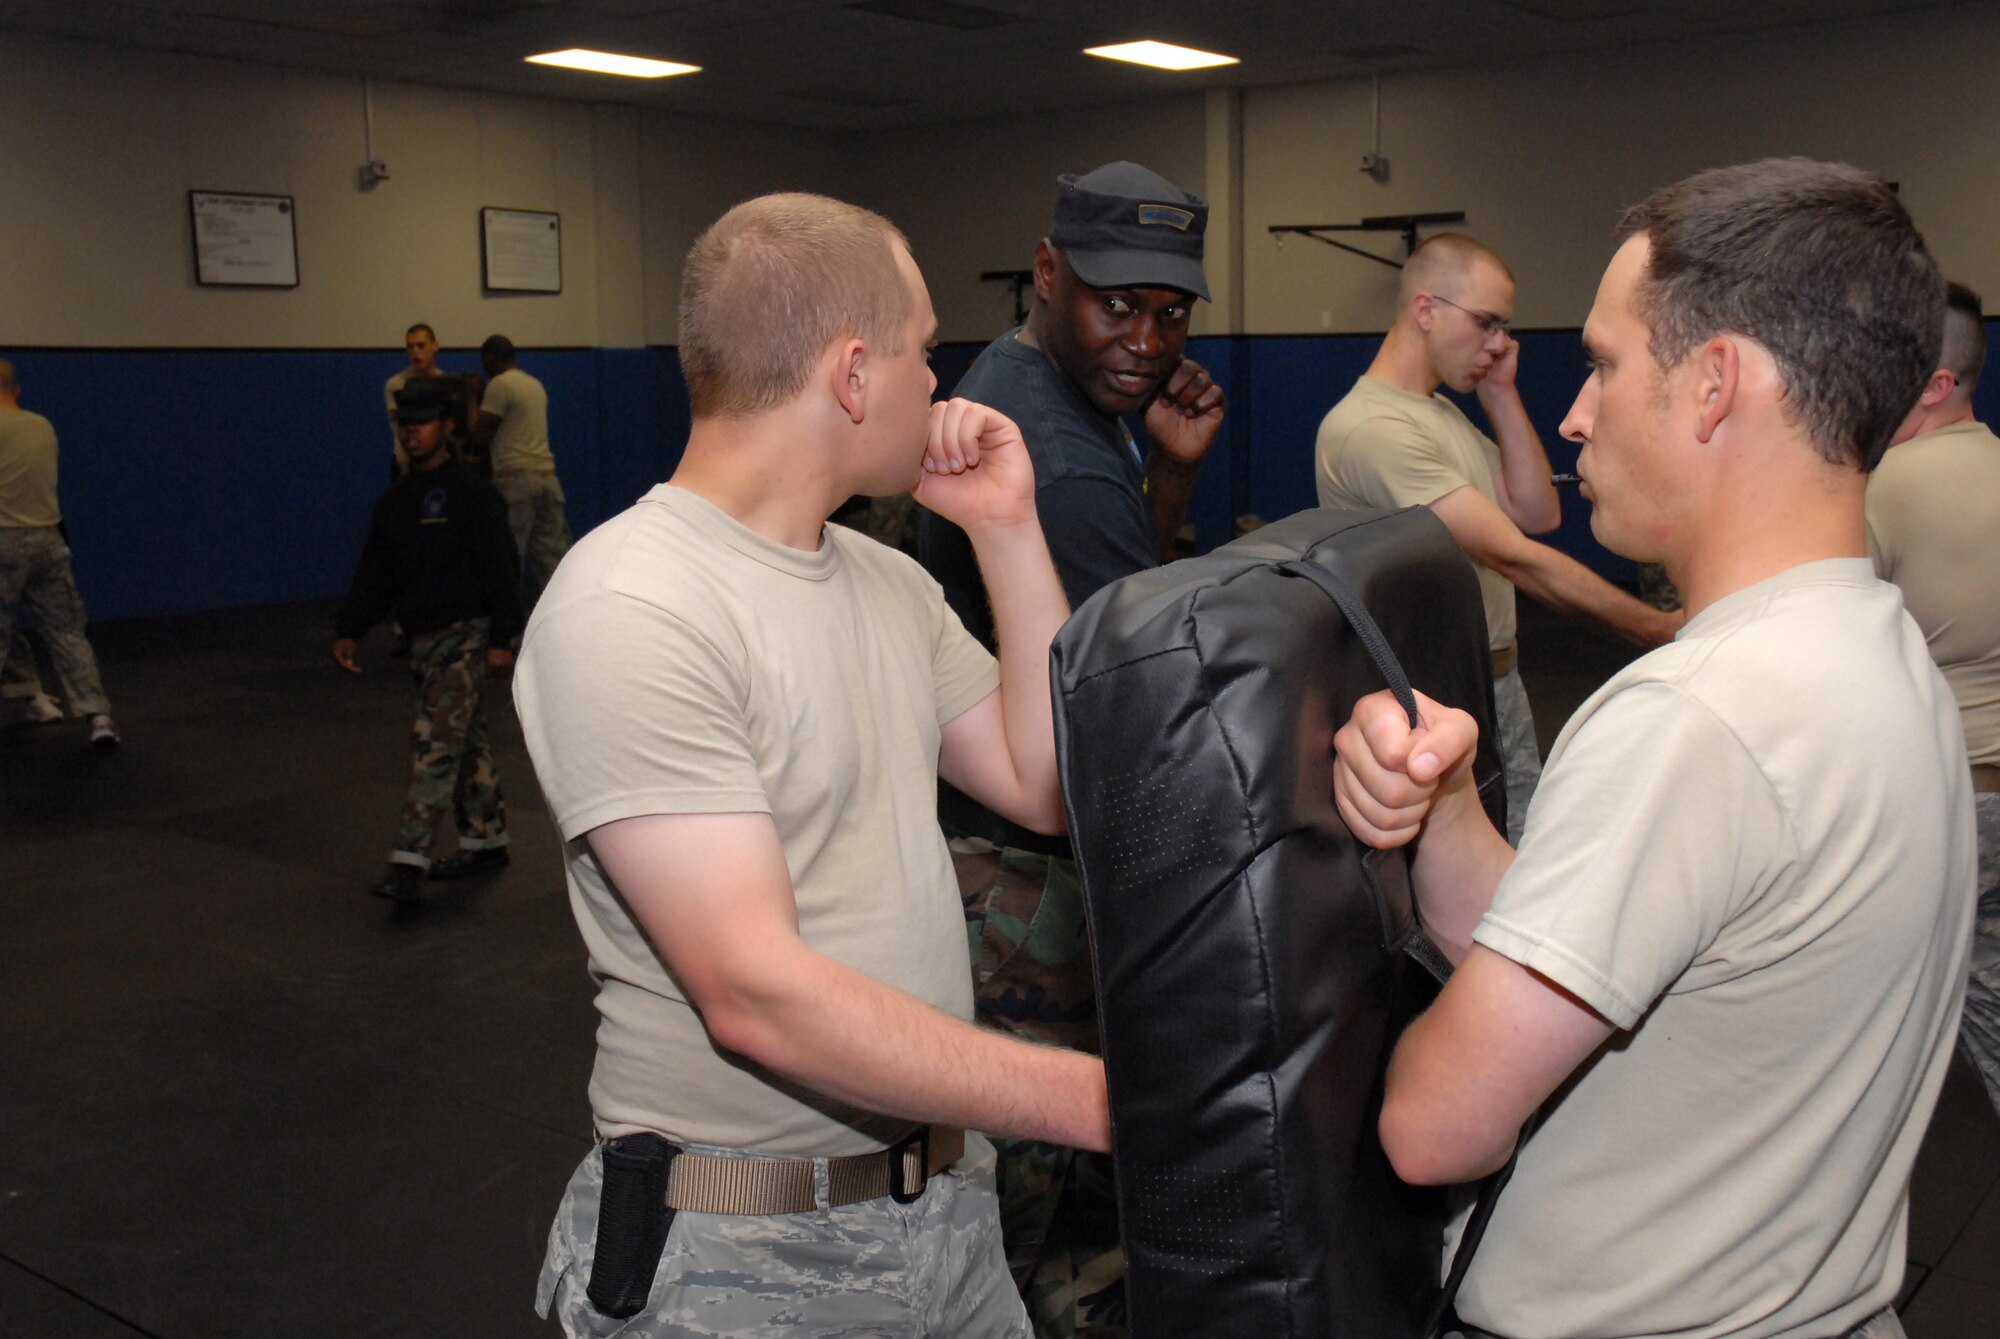 Fly-Away Security Team (FAST) instructor, Tech. Sgt. Jeffrey Cadogan, 421 Combat Training Squadron, instructs a student in the proper strike technique during collapsable baton training at the U.S. Air Force Expeditionary Center, Joint Base McGuire-Dix-Lakehurst, N.J. on June 4, 2009. FAST members provide airfield assessment and aircraft security for Air Force Central Command  transient resources. (U.S. Air Force Photo/Tech. Sgt. Paul R. Evans)